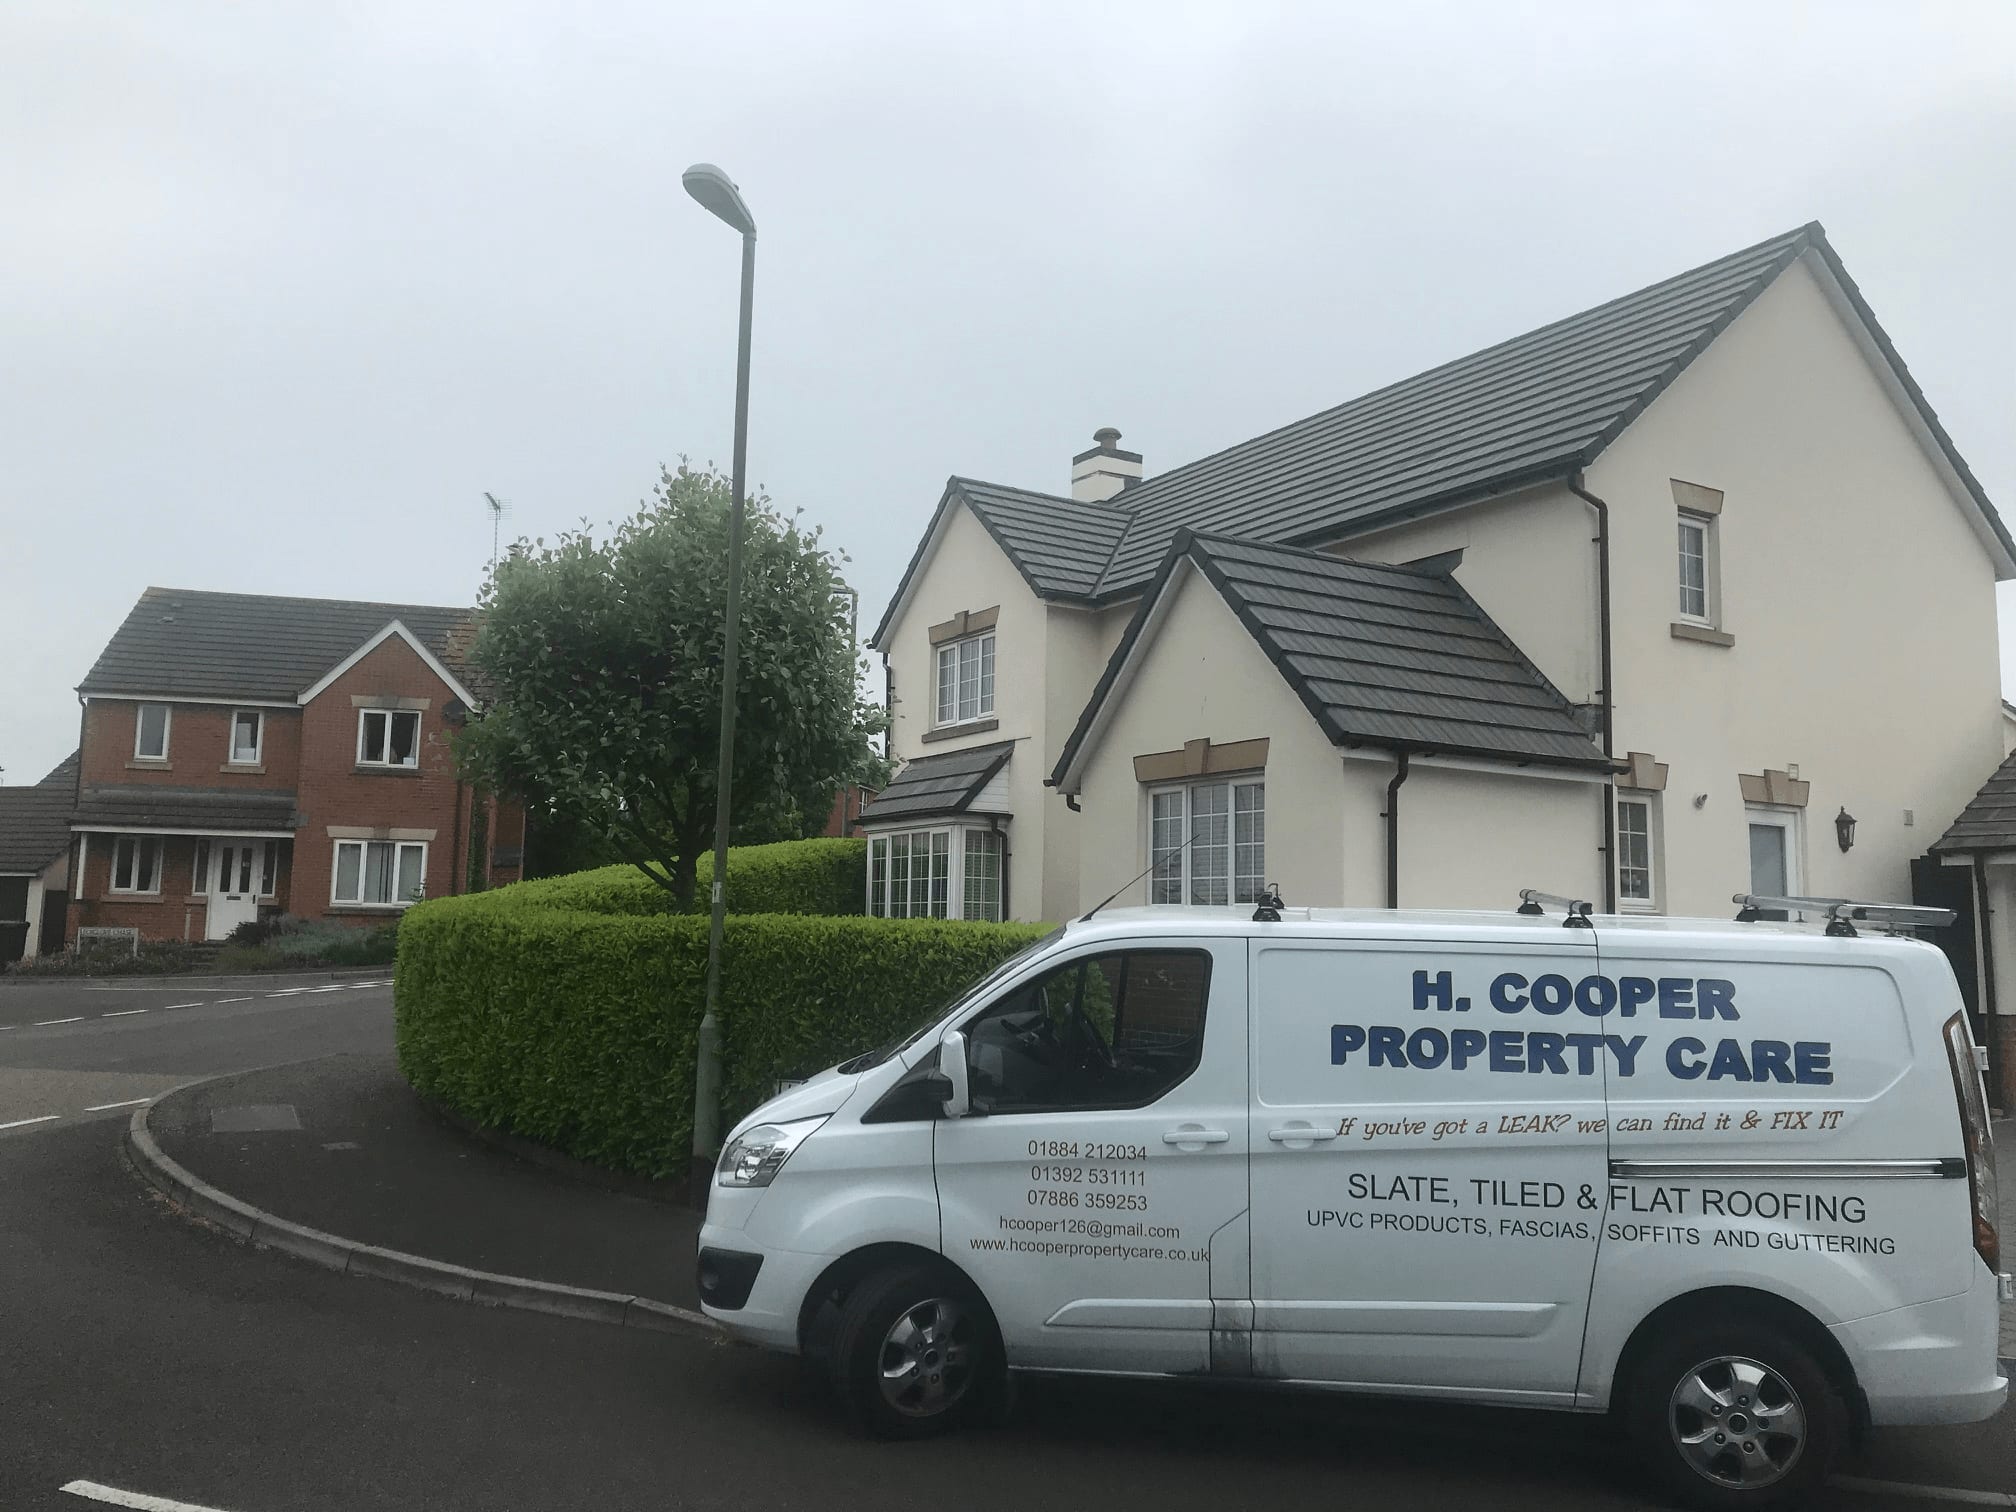 H. Cooper Property Care Exeter 01823 673068